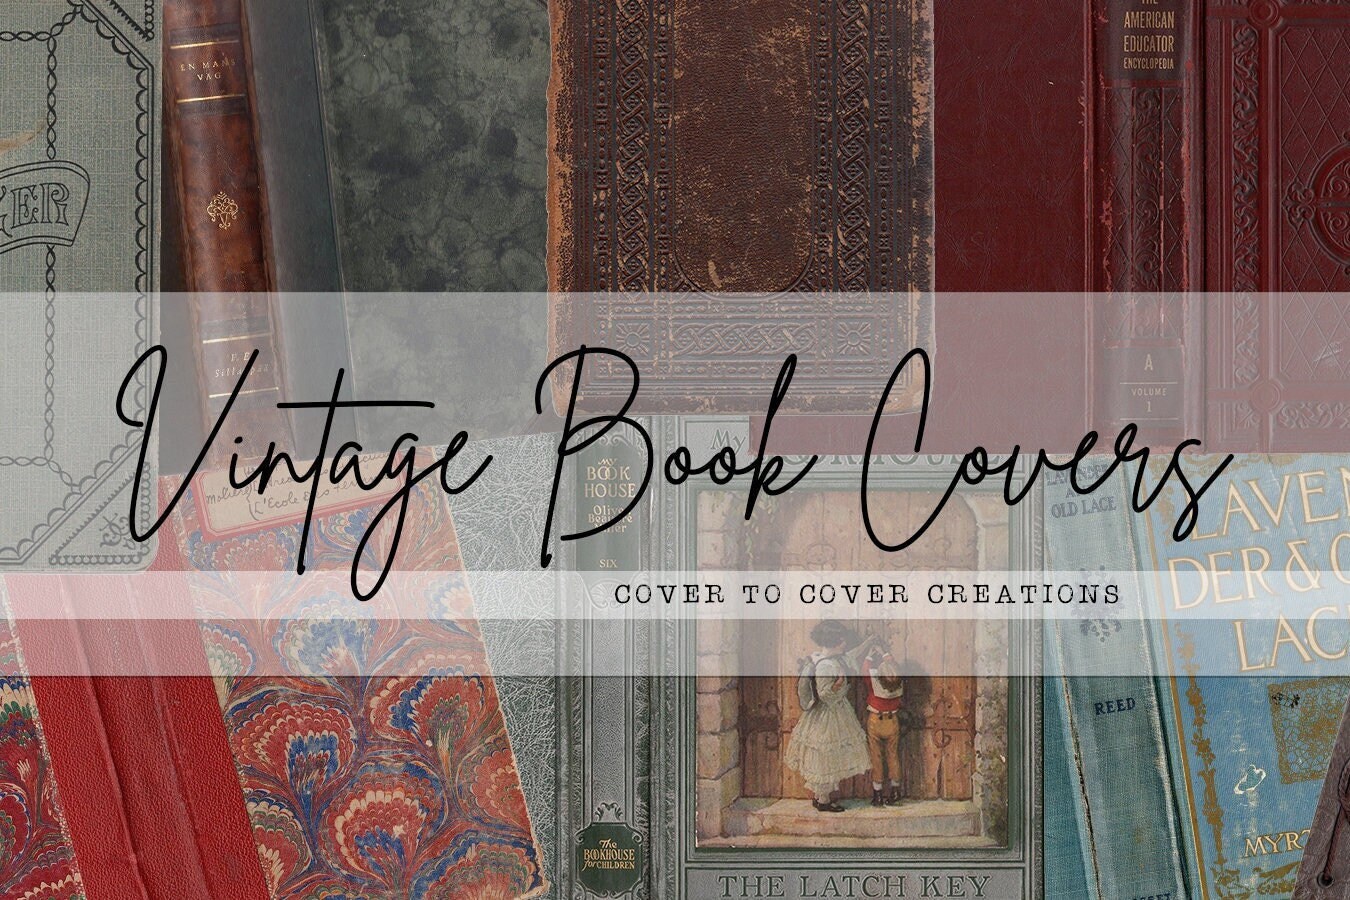 Collage Book Covers - 60+ Best Collage Book Cover Ideas & Inspiration